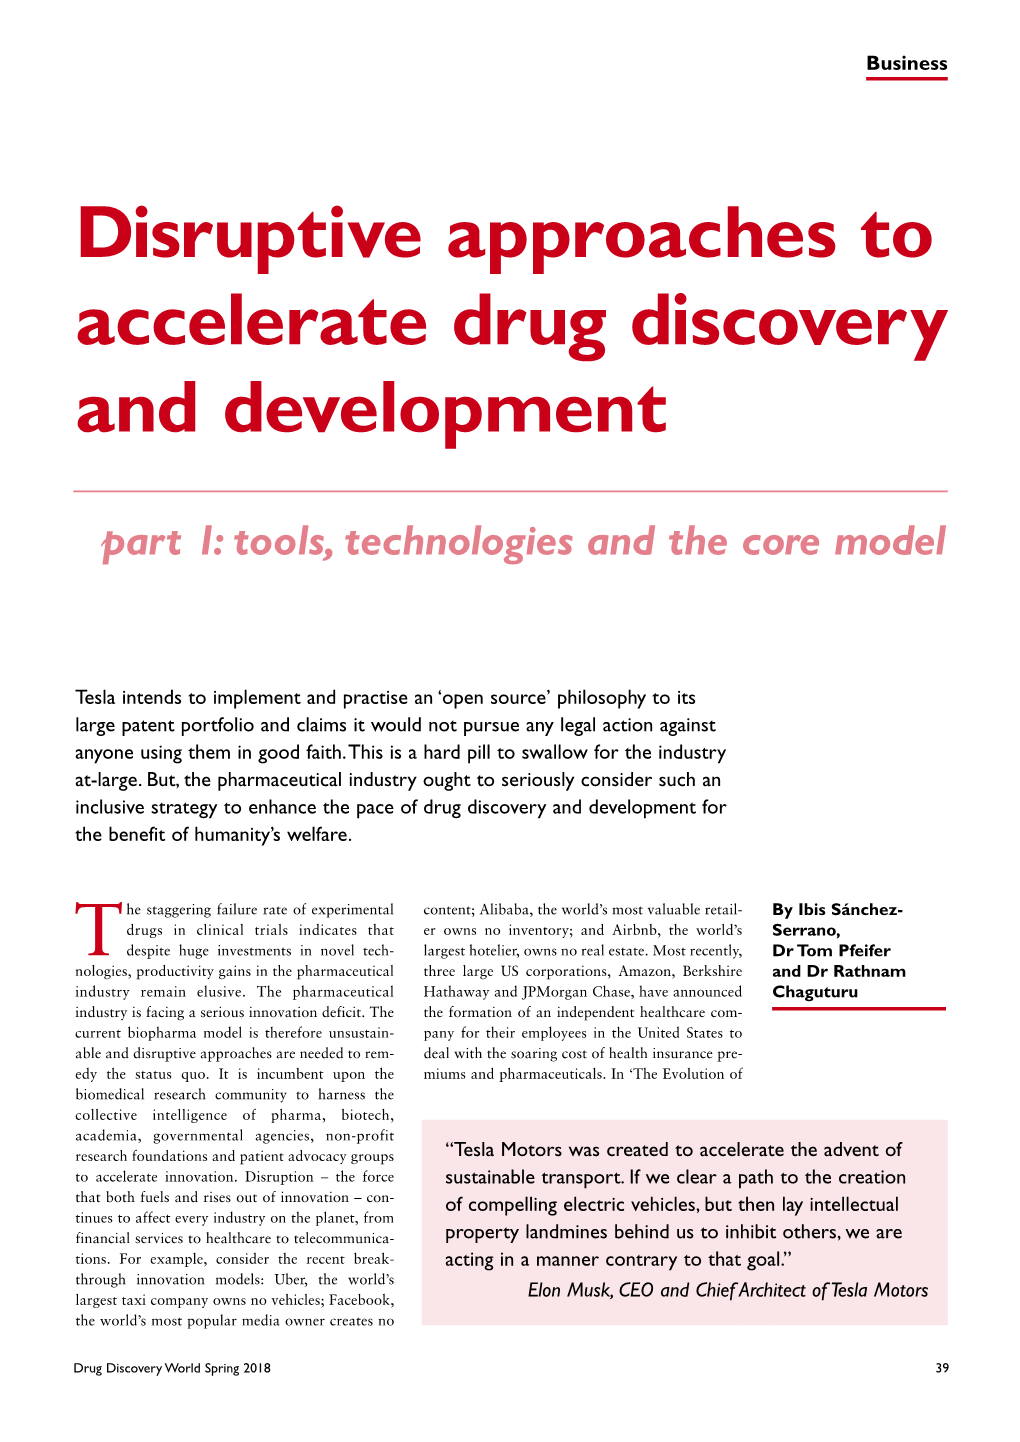 Disruptive Approaches to Accelerate Drug Discovery and Development